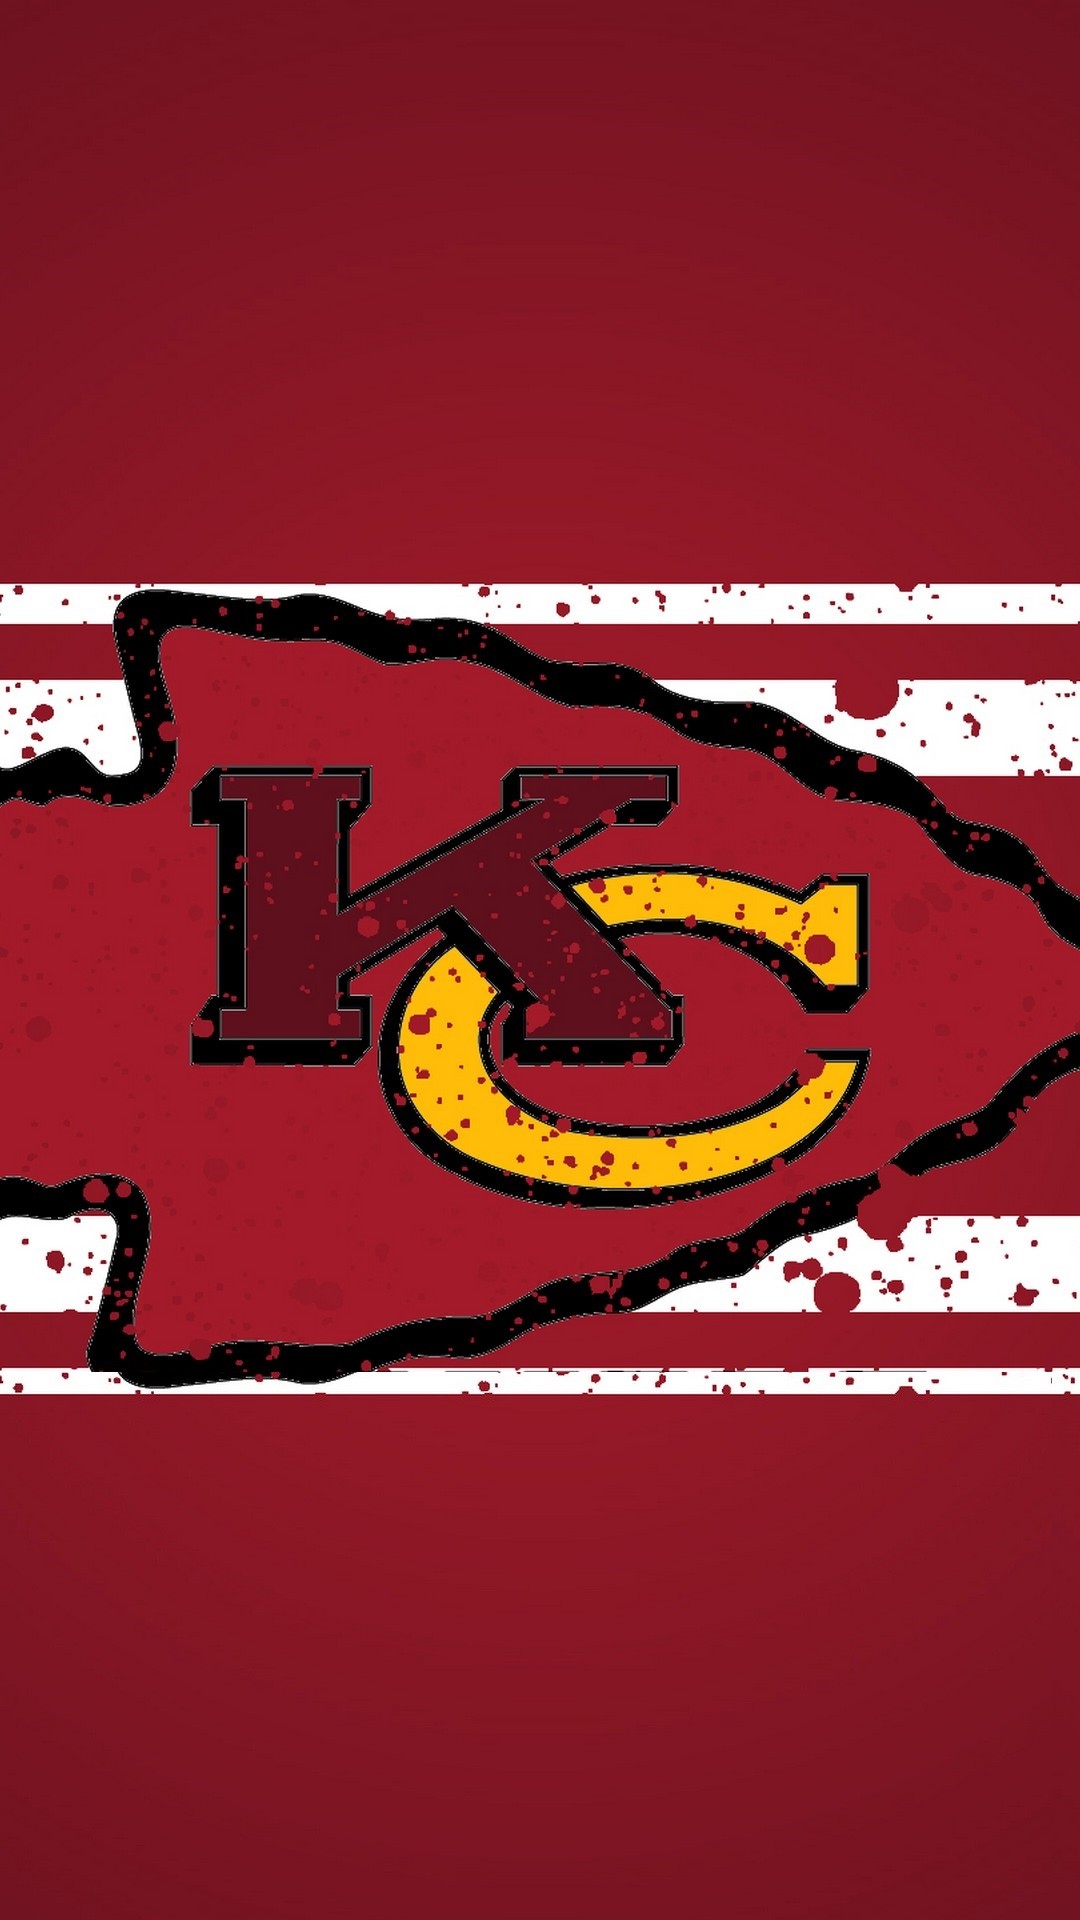 Kansas City Chiefs NFL iPhone Wallpaper with high-resolution 1080x1920 pixel. Download and set as wallpaper for Desktop Computer, Apple iPhone X, XS Max, XR, 8, 7, 6, SE, iPad, Android